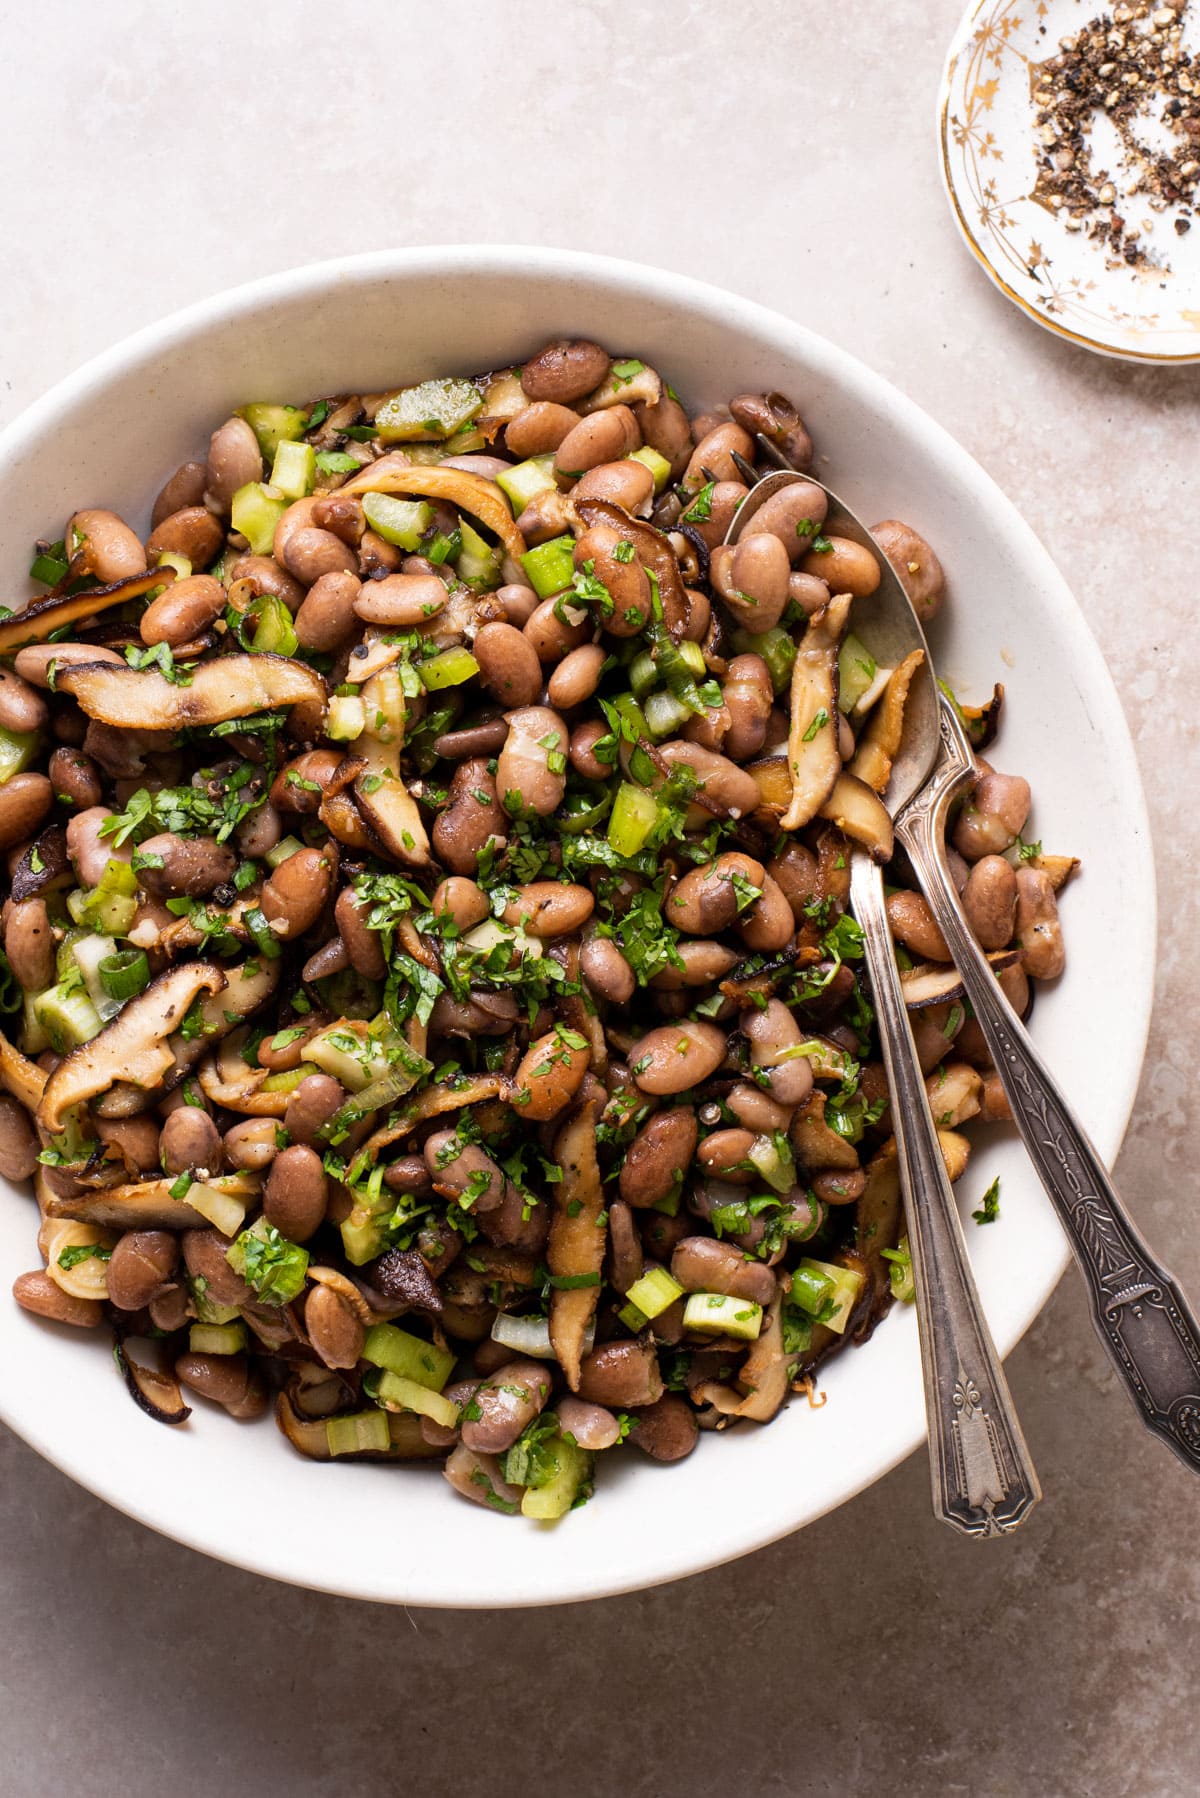 Vegan pinto bean salad with shiitake mushrooms and herbs in a white bowl.